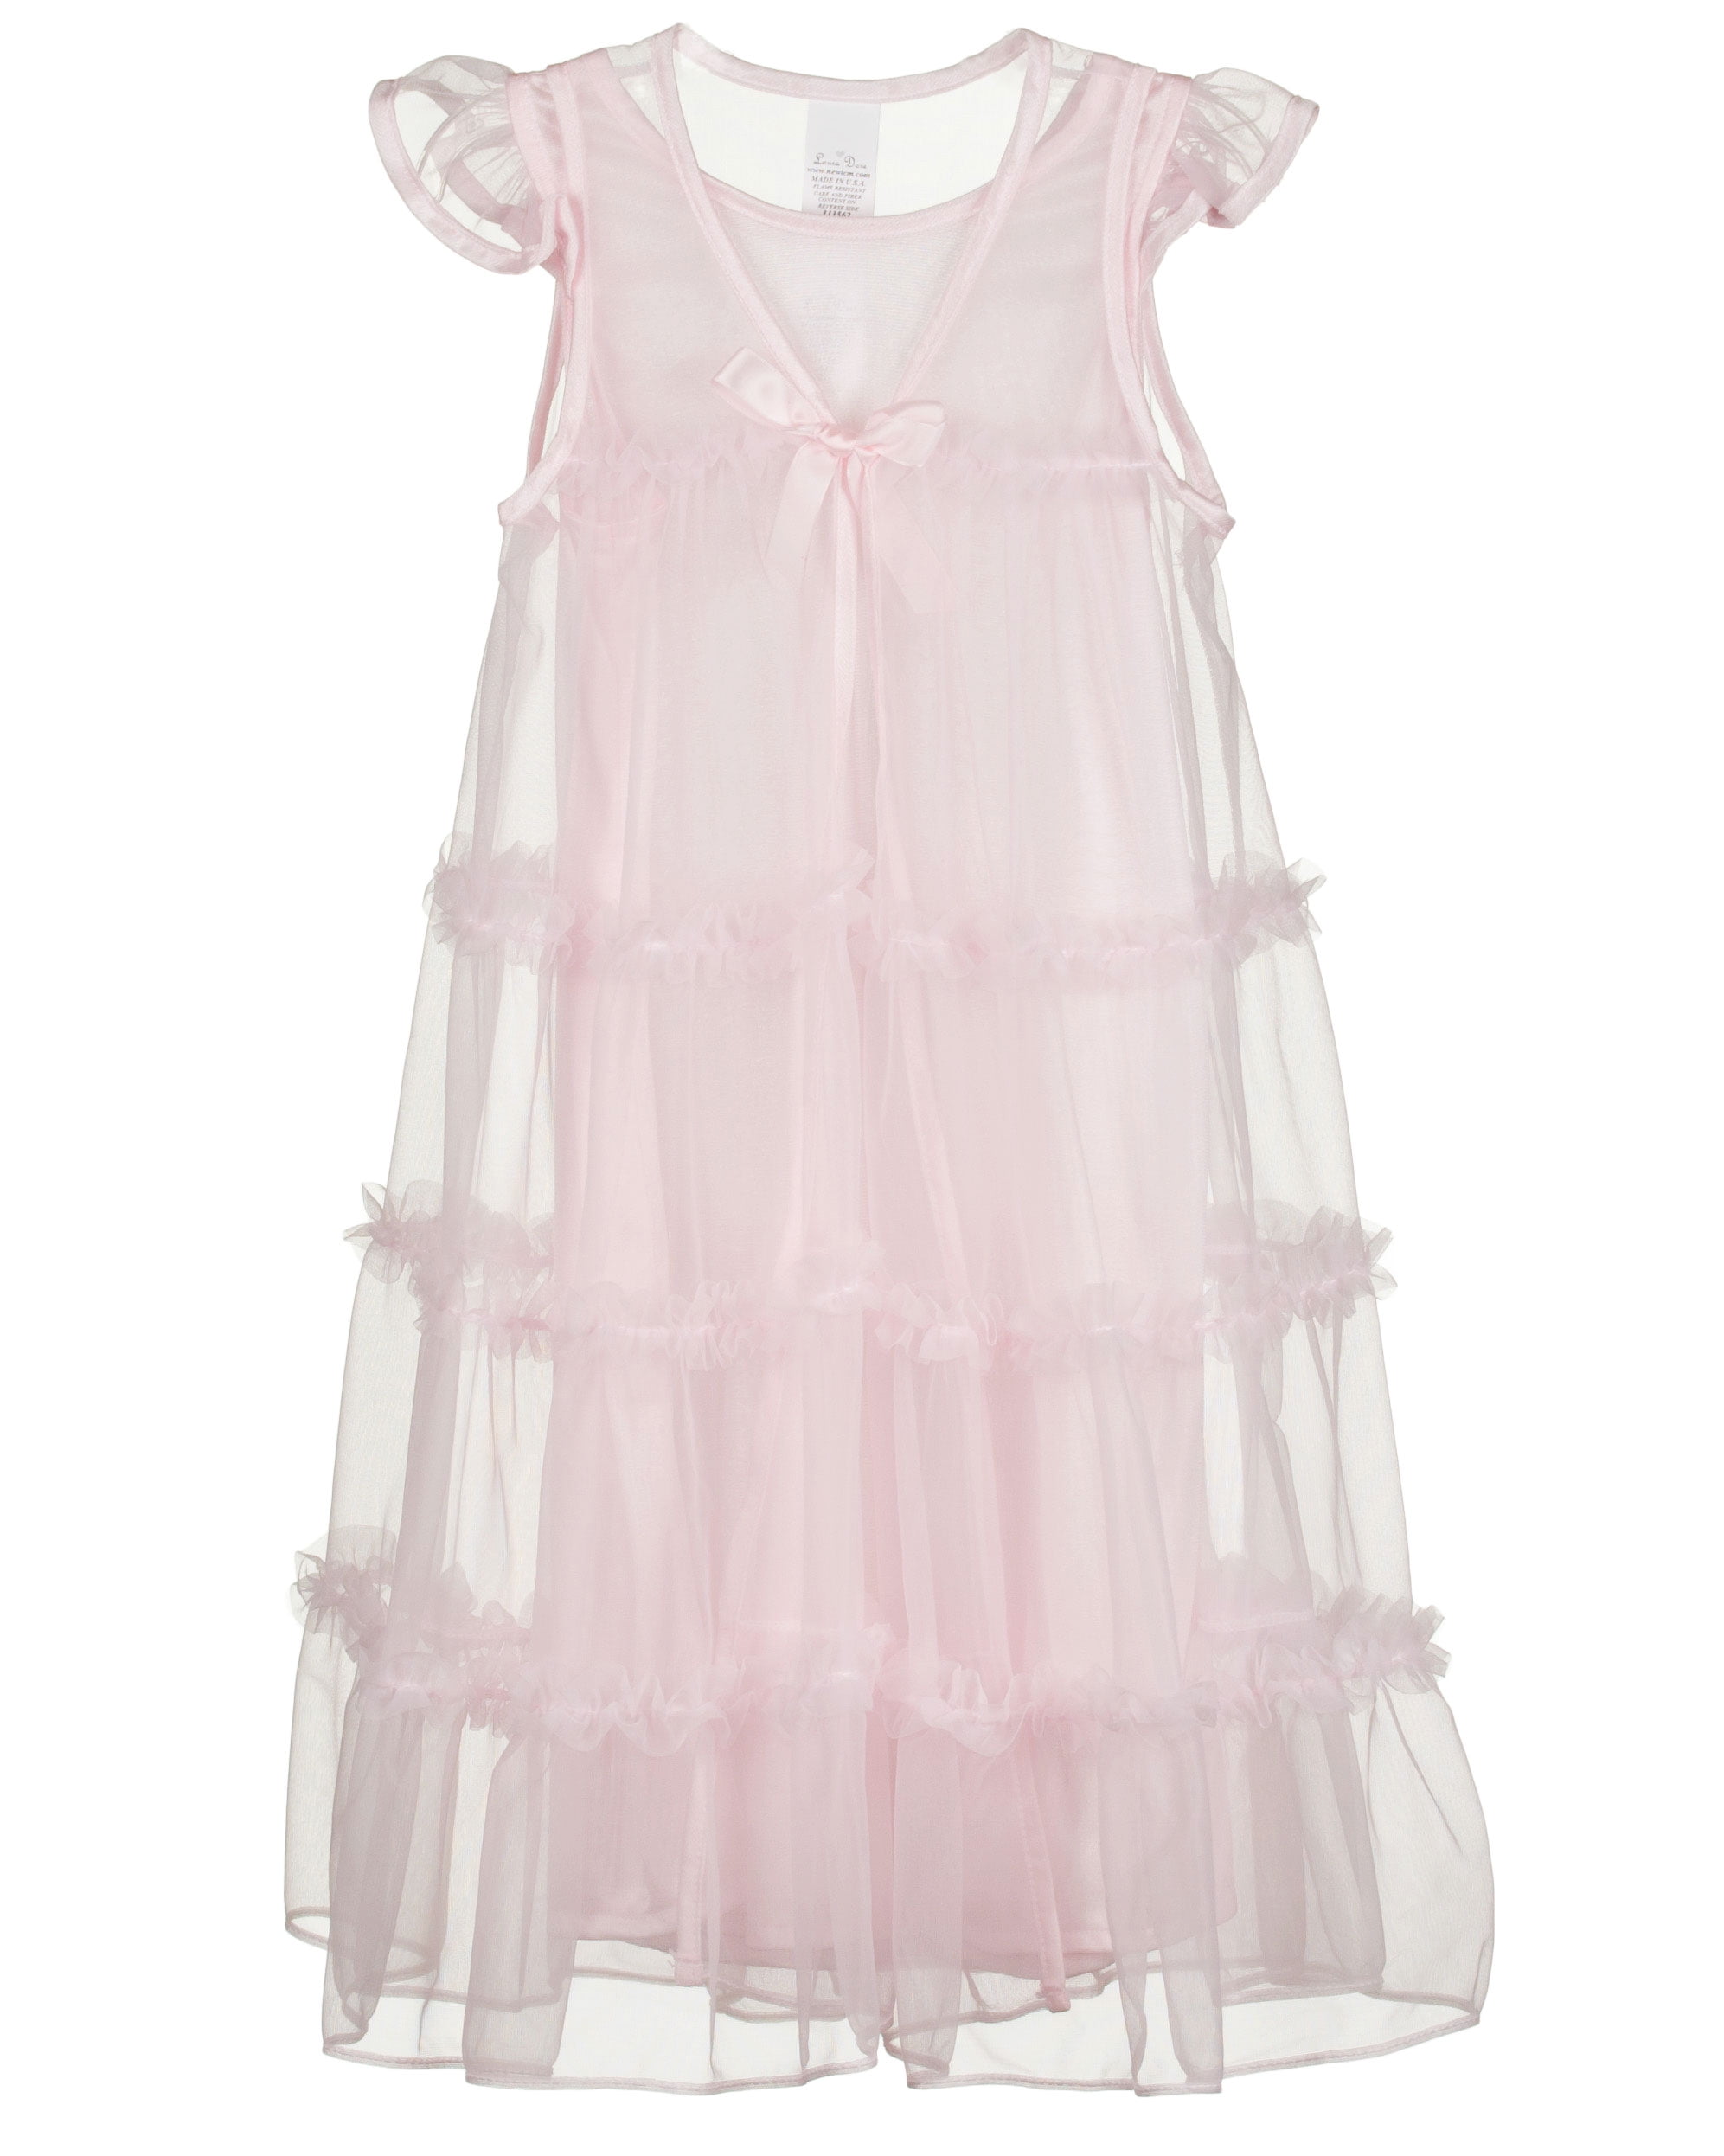 Laura Dare Princess Peignoir Night Gown and Robe Set, (2T - 14 ...